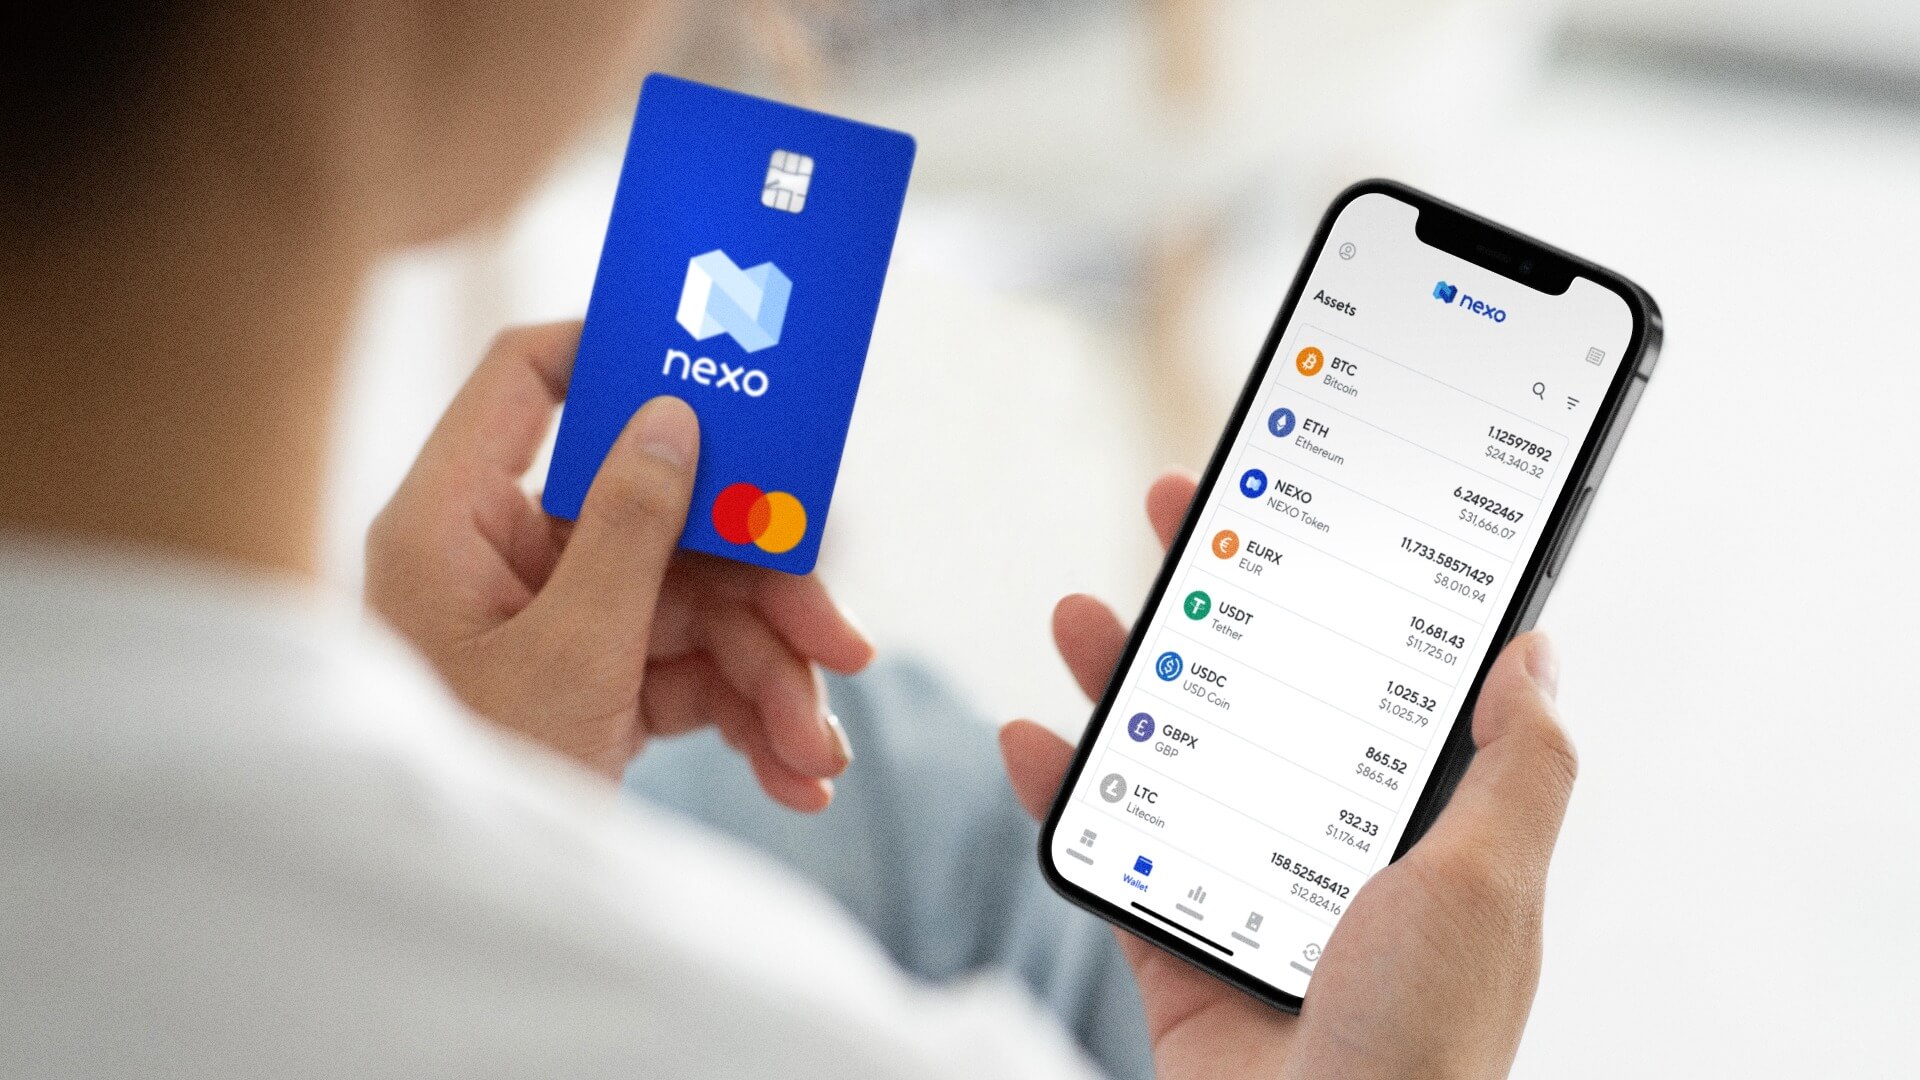 The First “Spend & Save” Report: How the Nexo Card Saved 10,500 Bitcoin from Being Sold to the Market